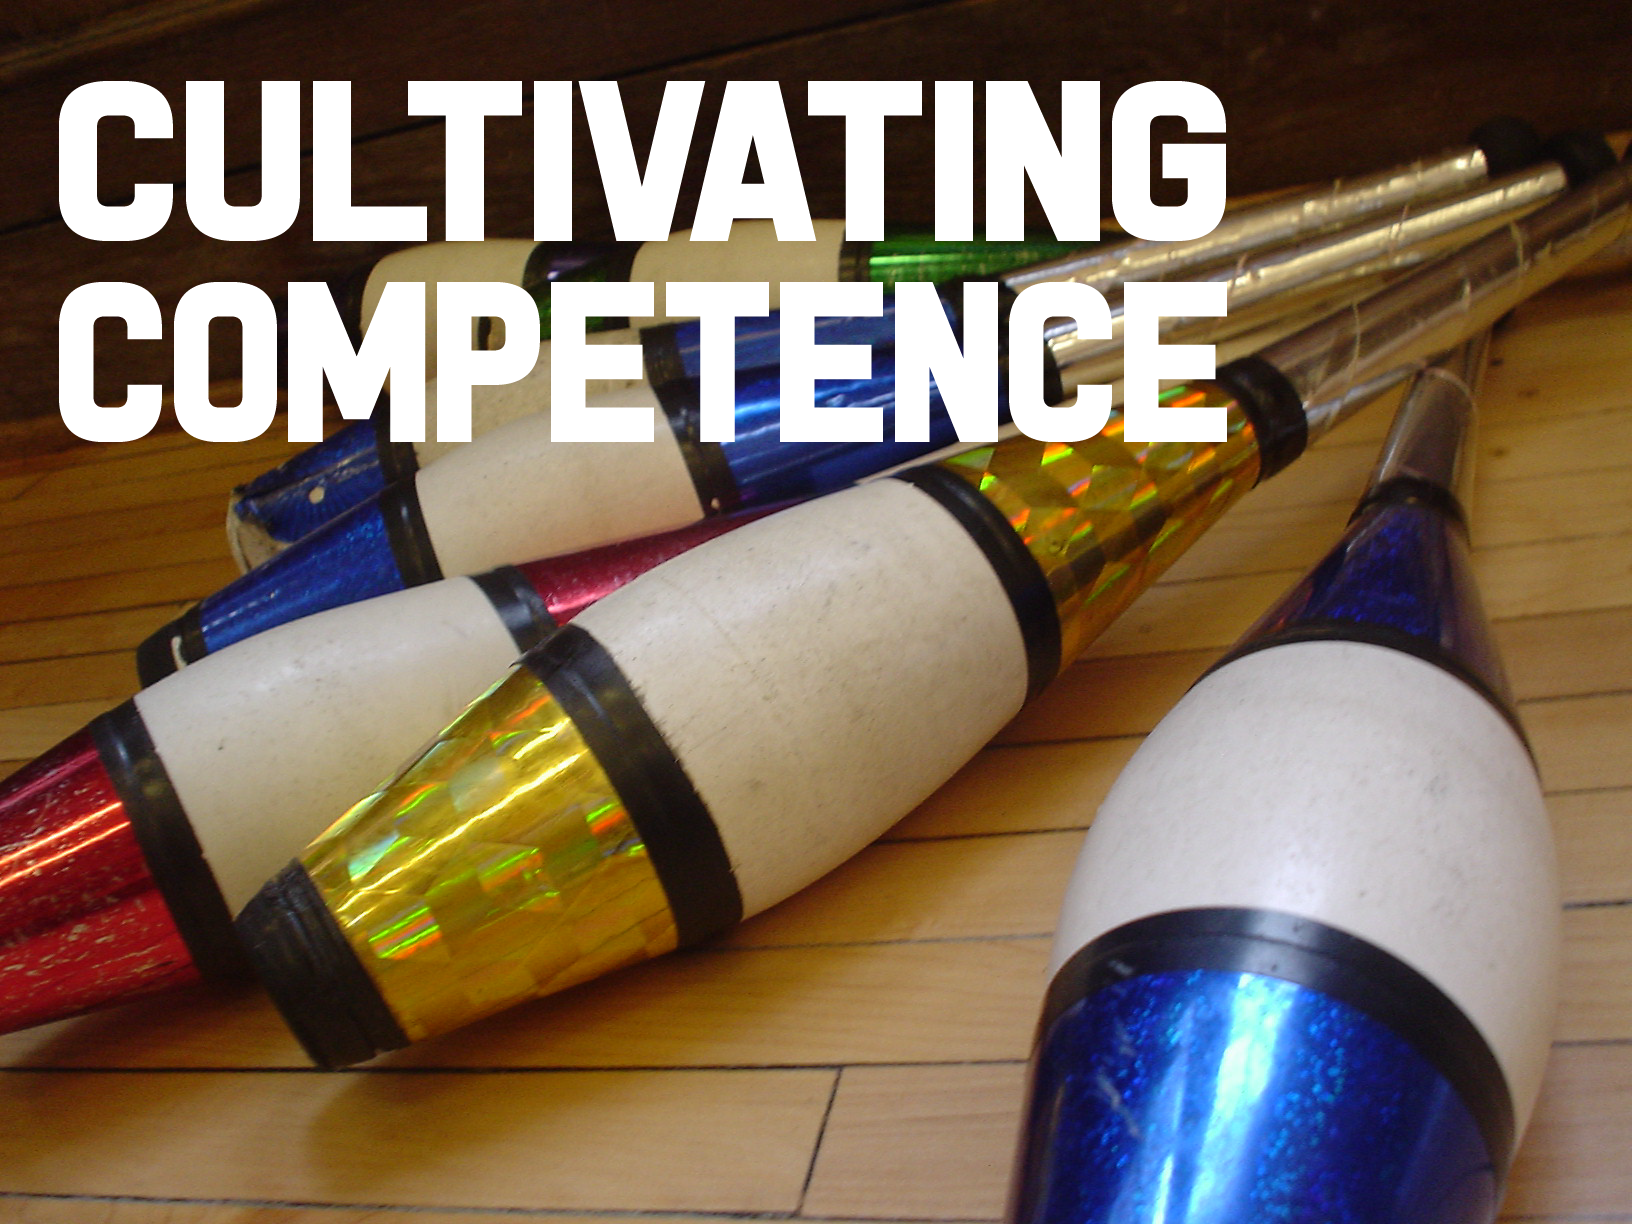 Cultivating Competence